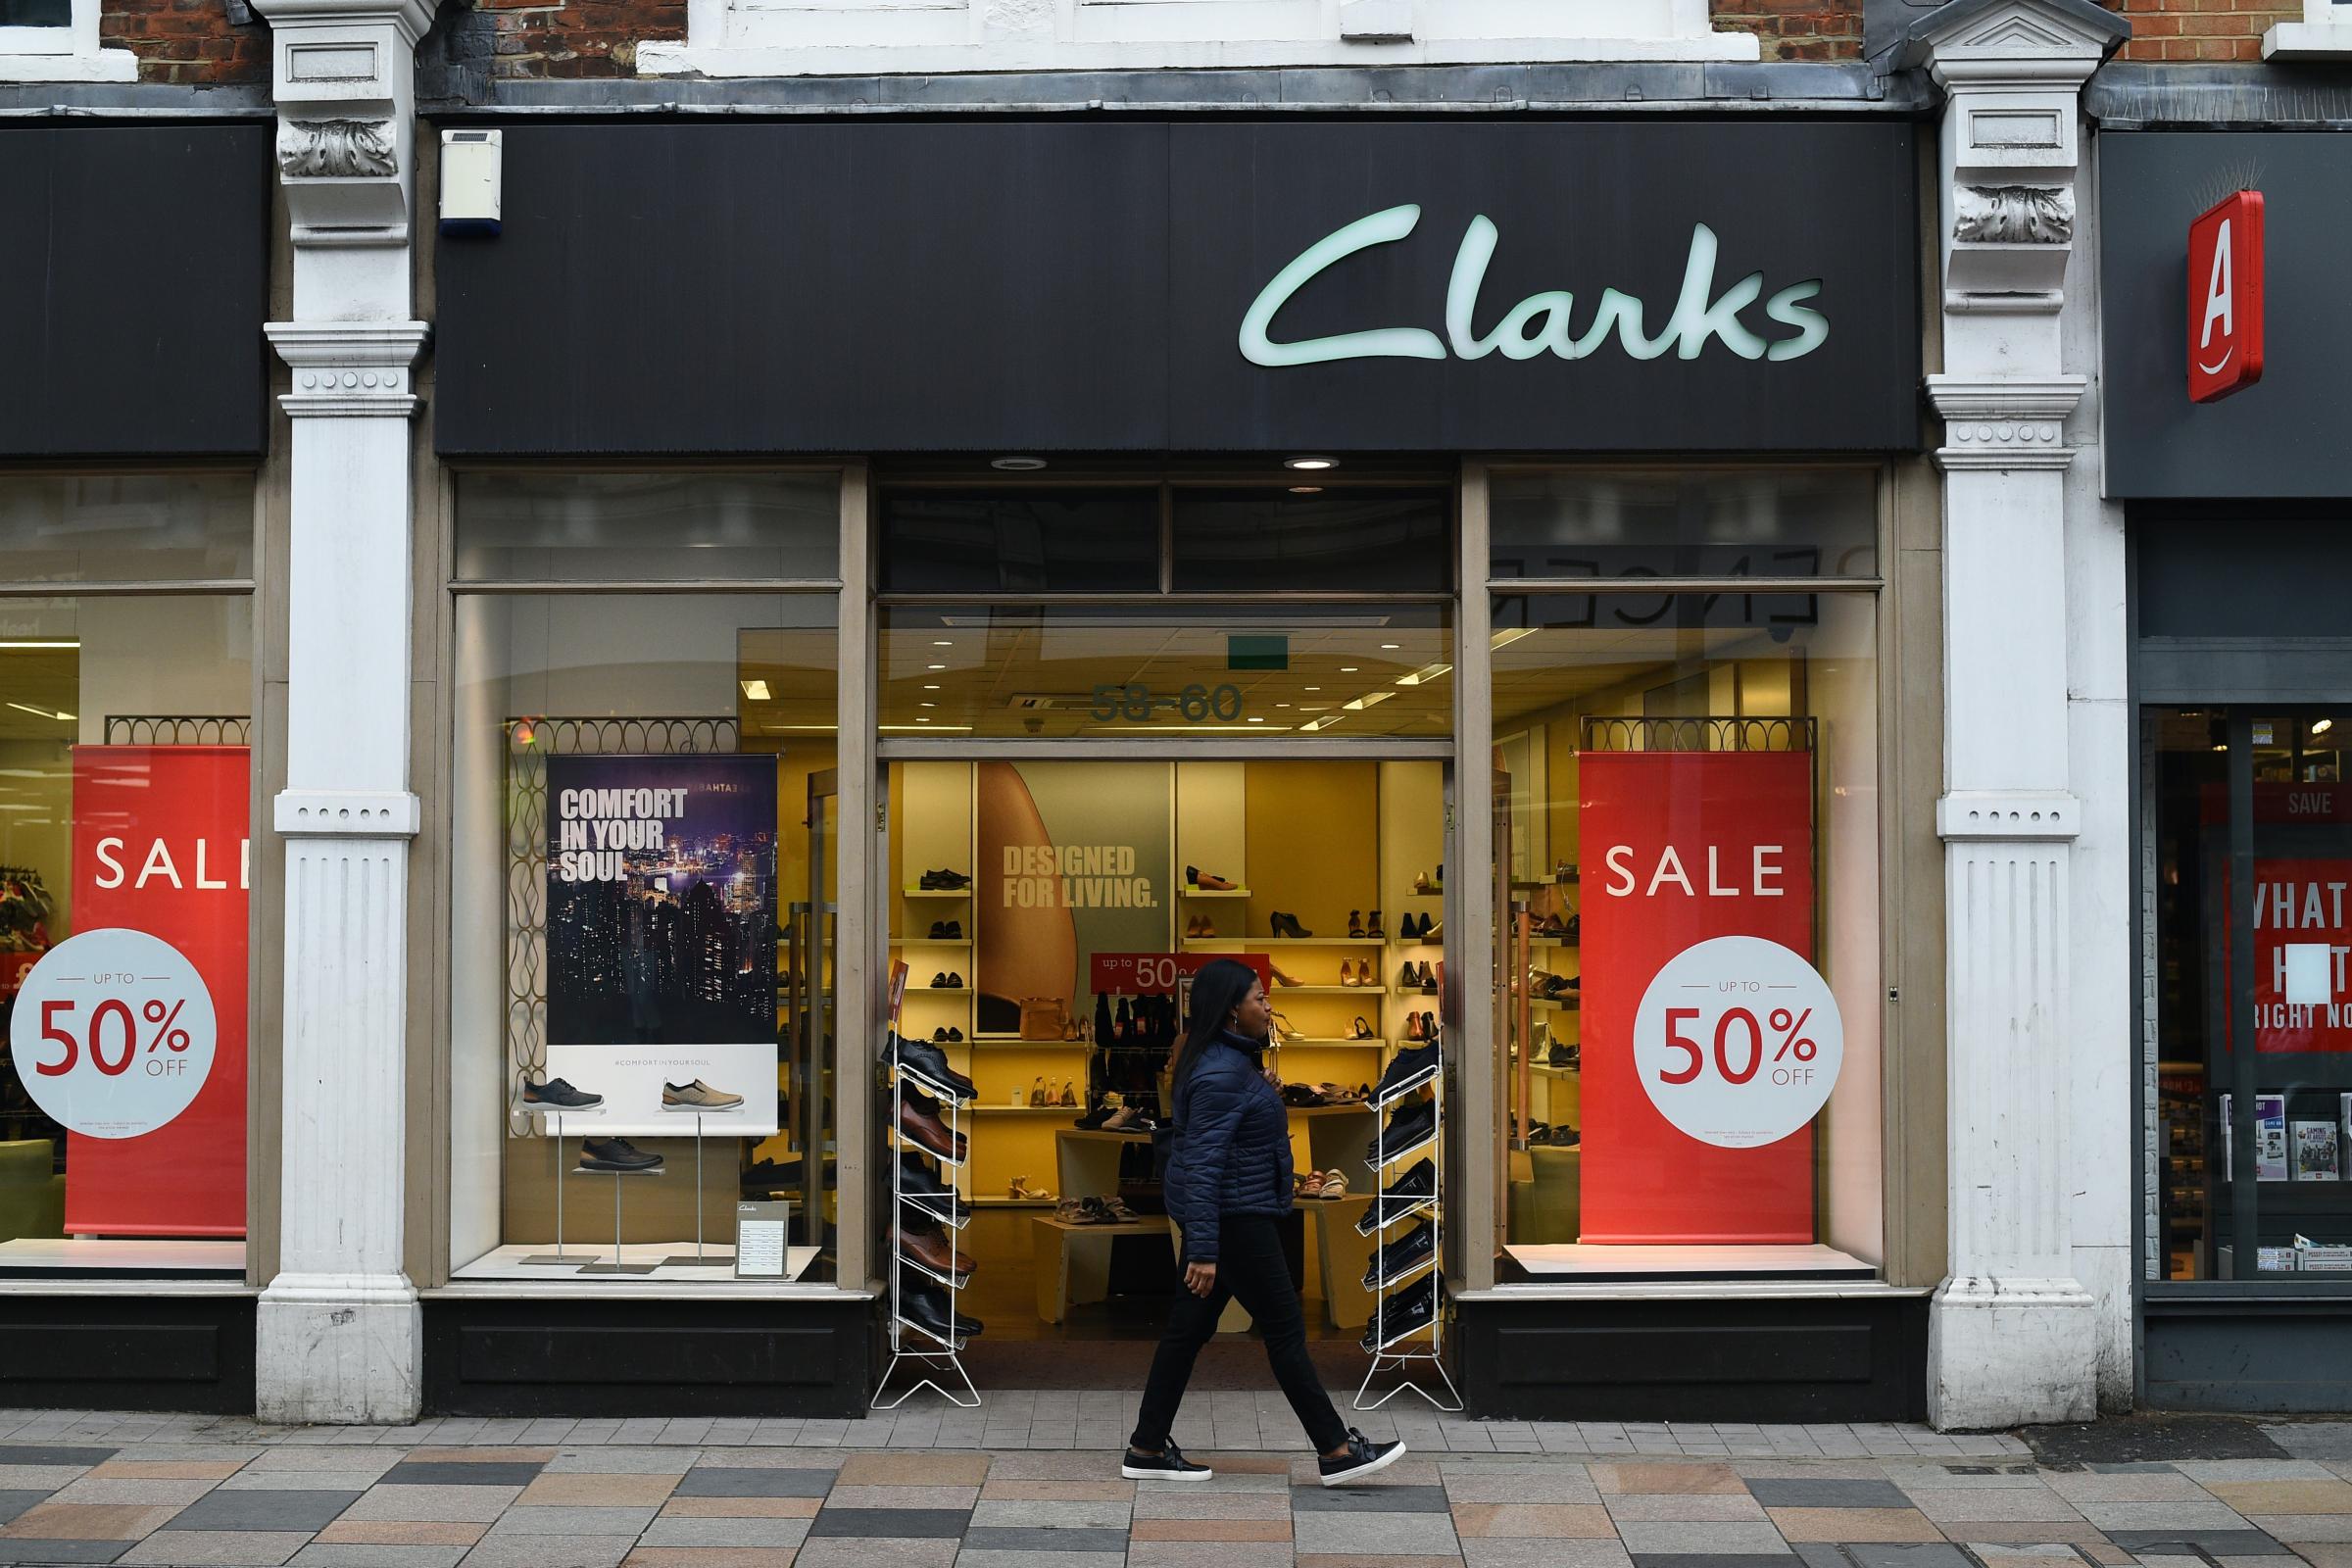 Clunky clarks basingstoke opening hours 